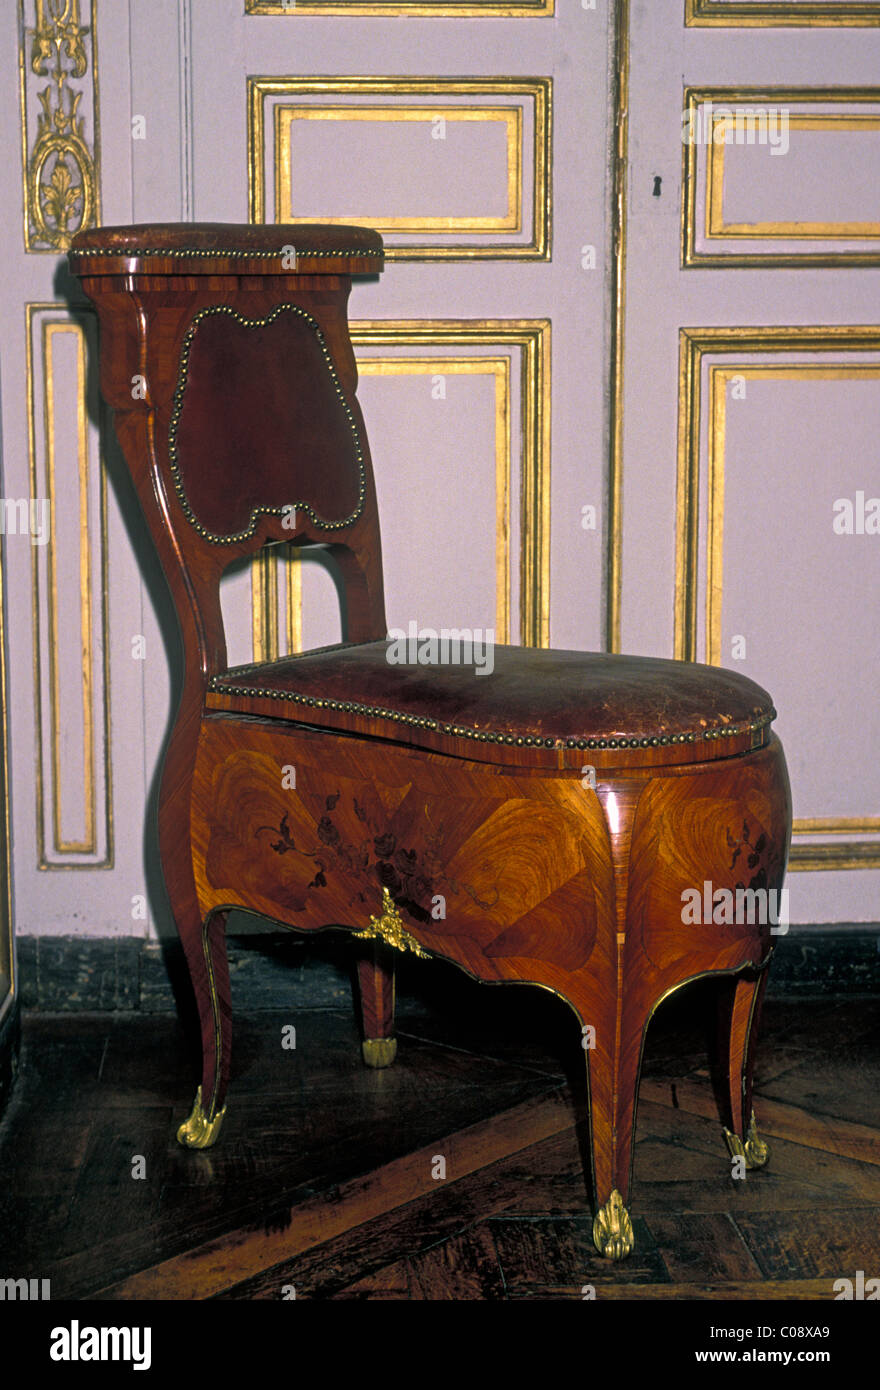 commode, chamber pot, King Louis XV, Palace of Versailles, city of Versailles, Ile-de-France, France, Europe Stock Photo